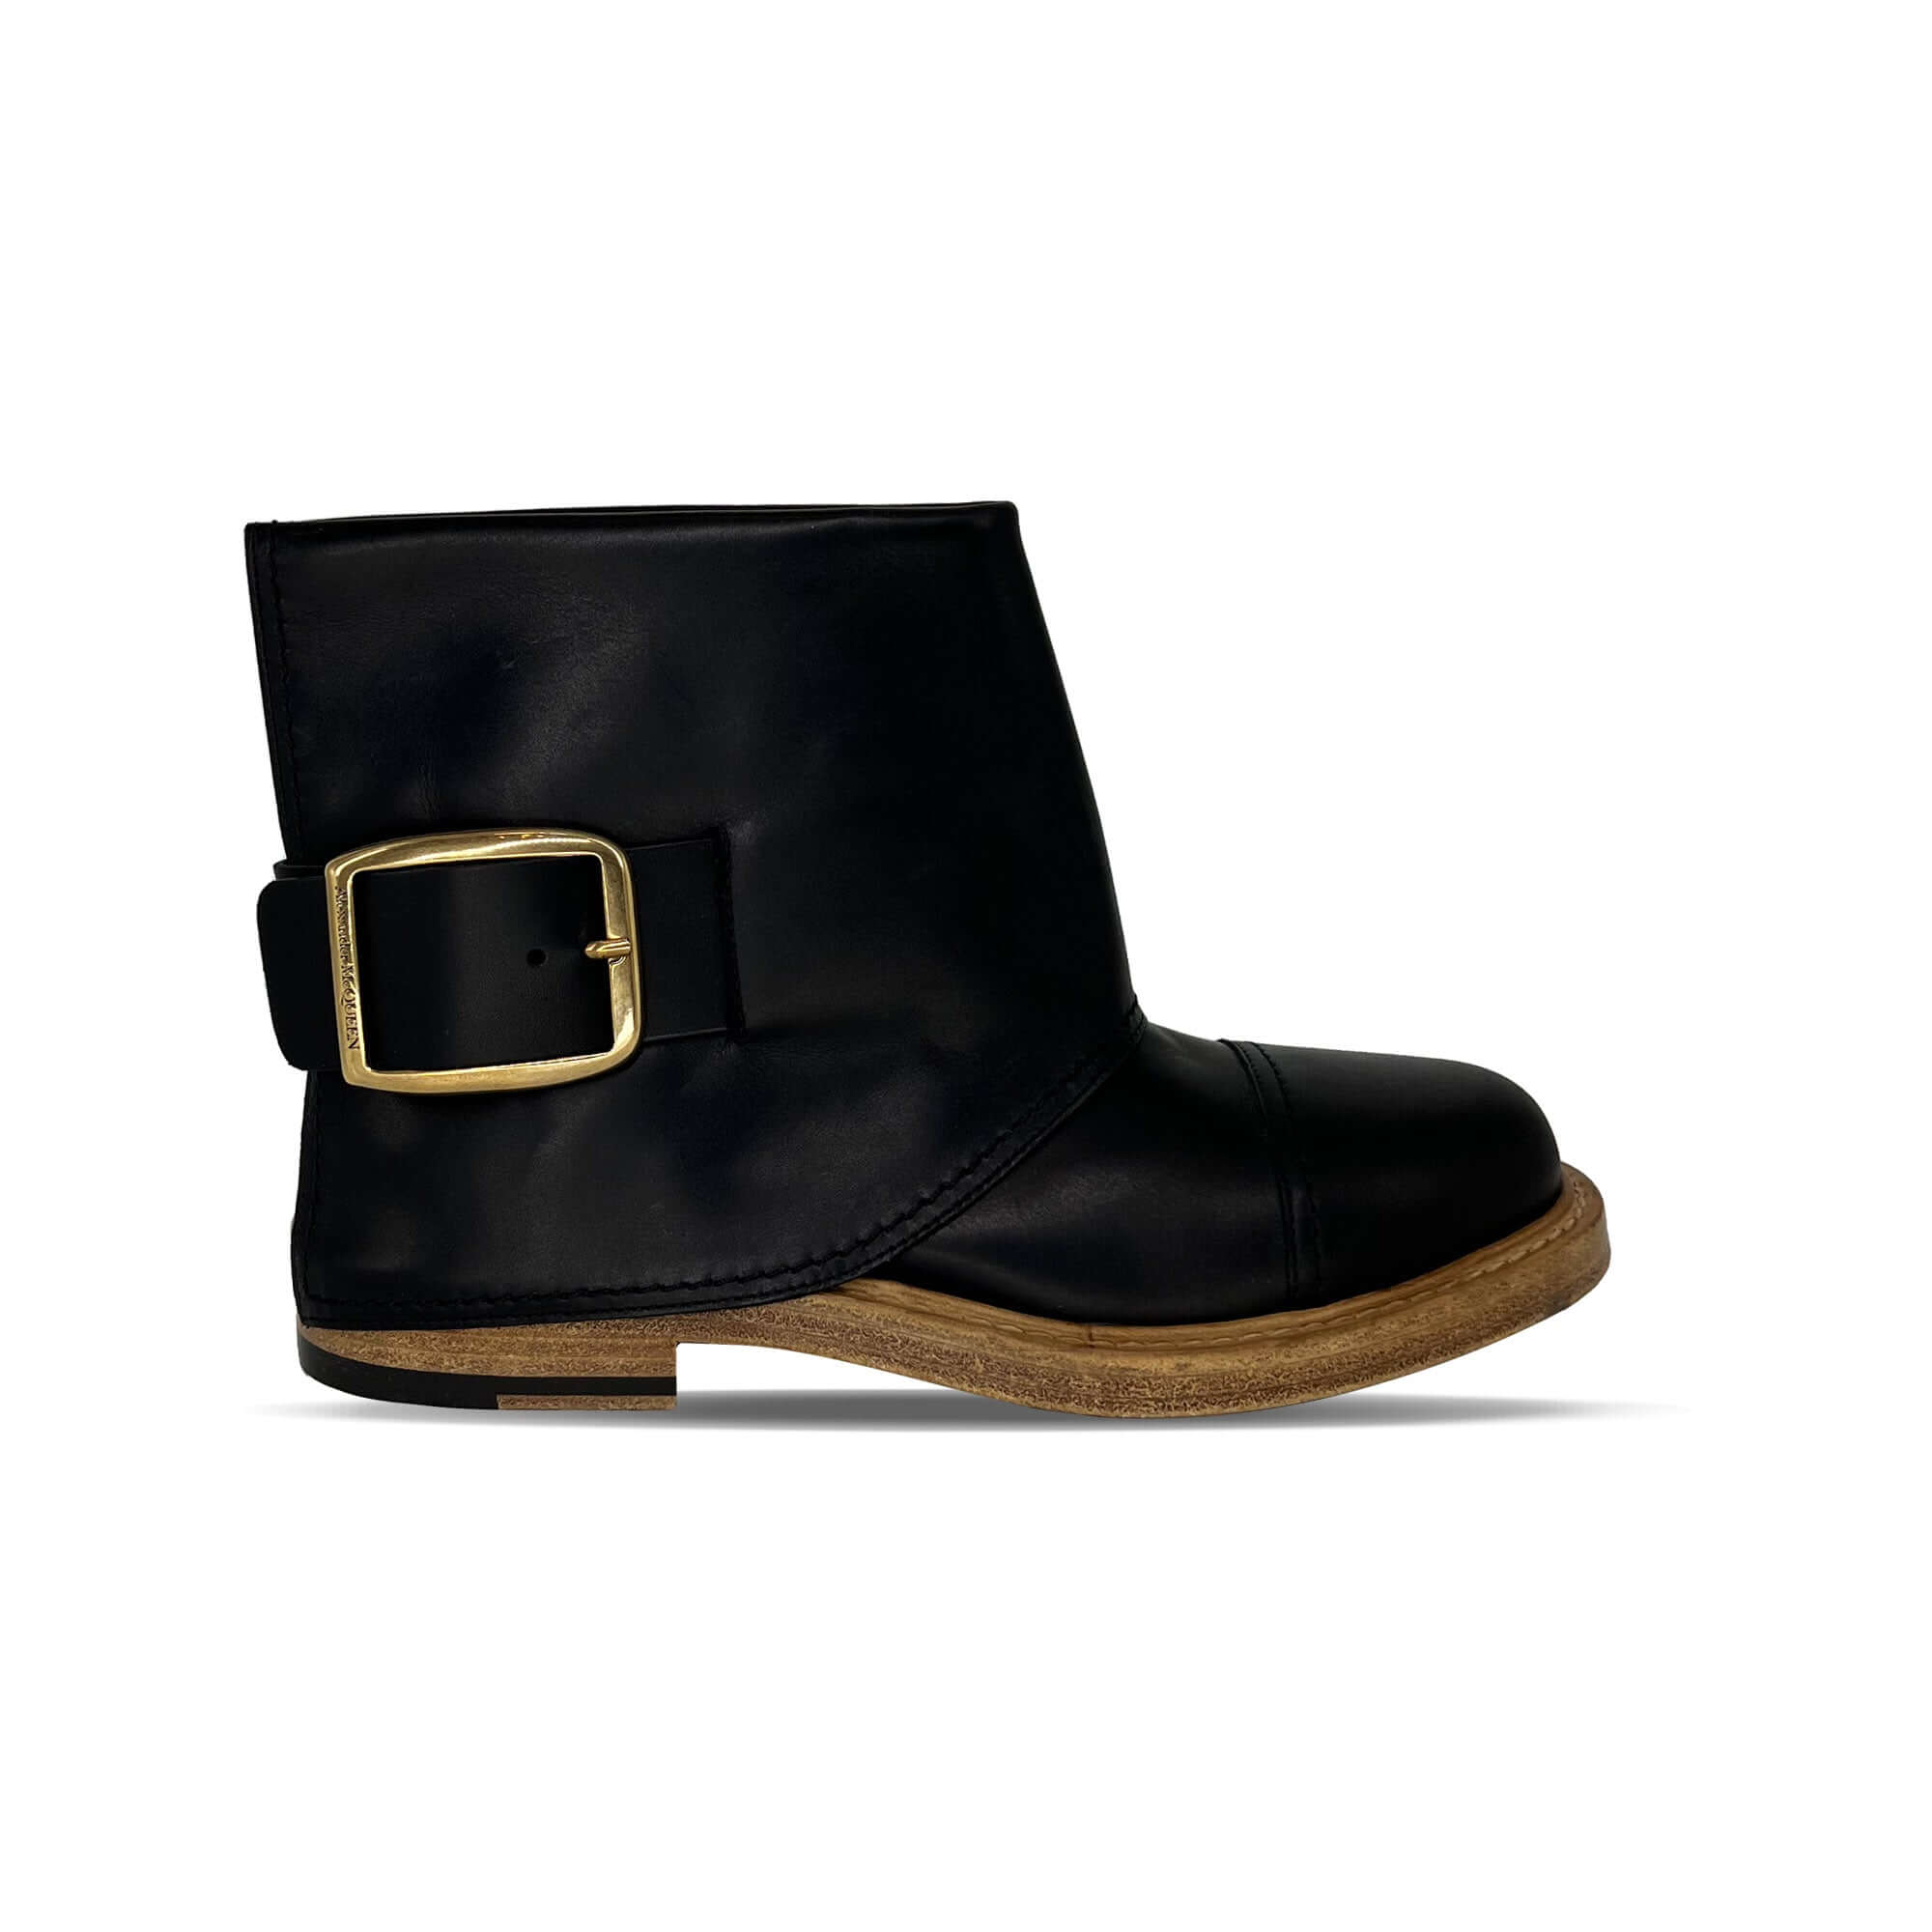 Alexander McQueen gold buckled leather ankle boots